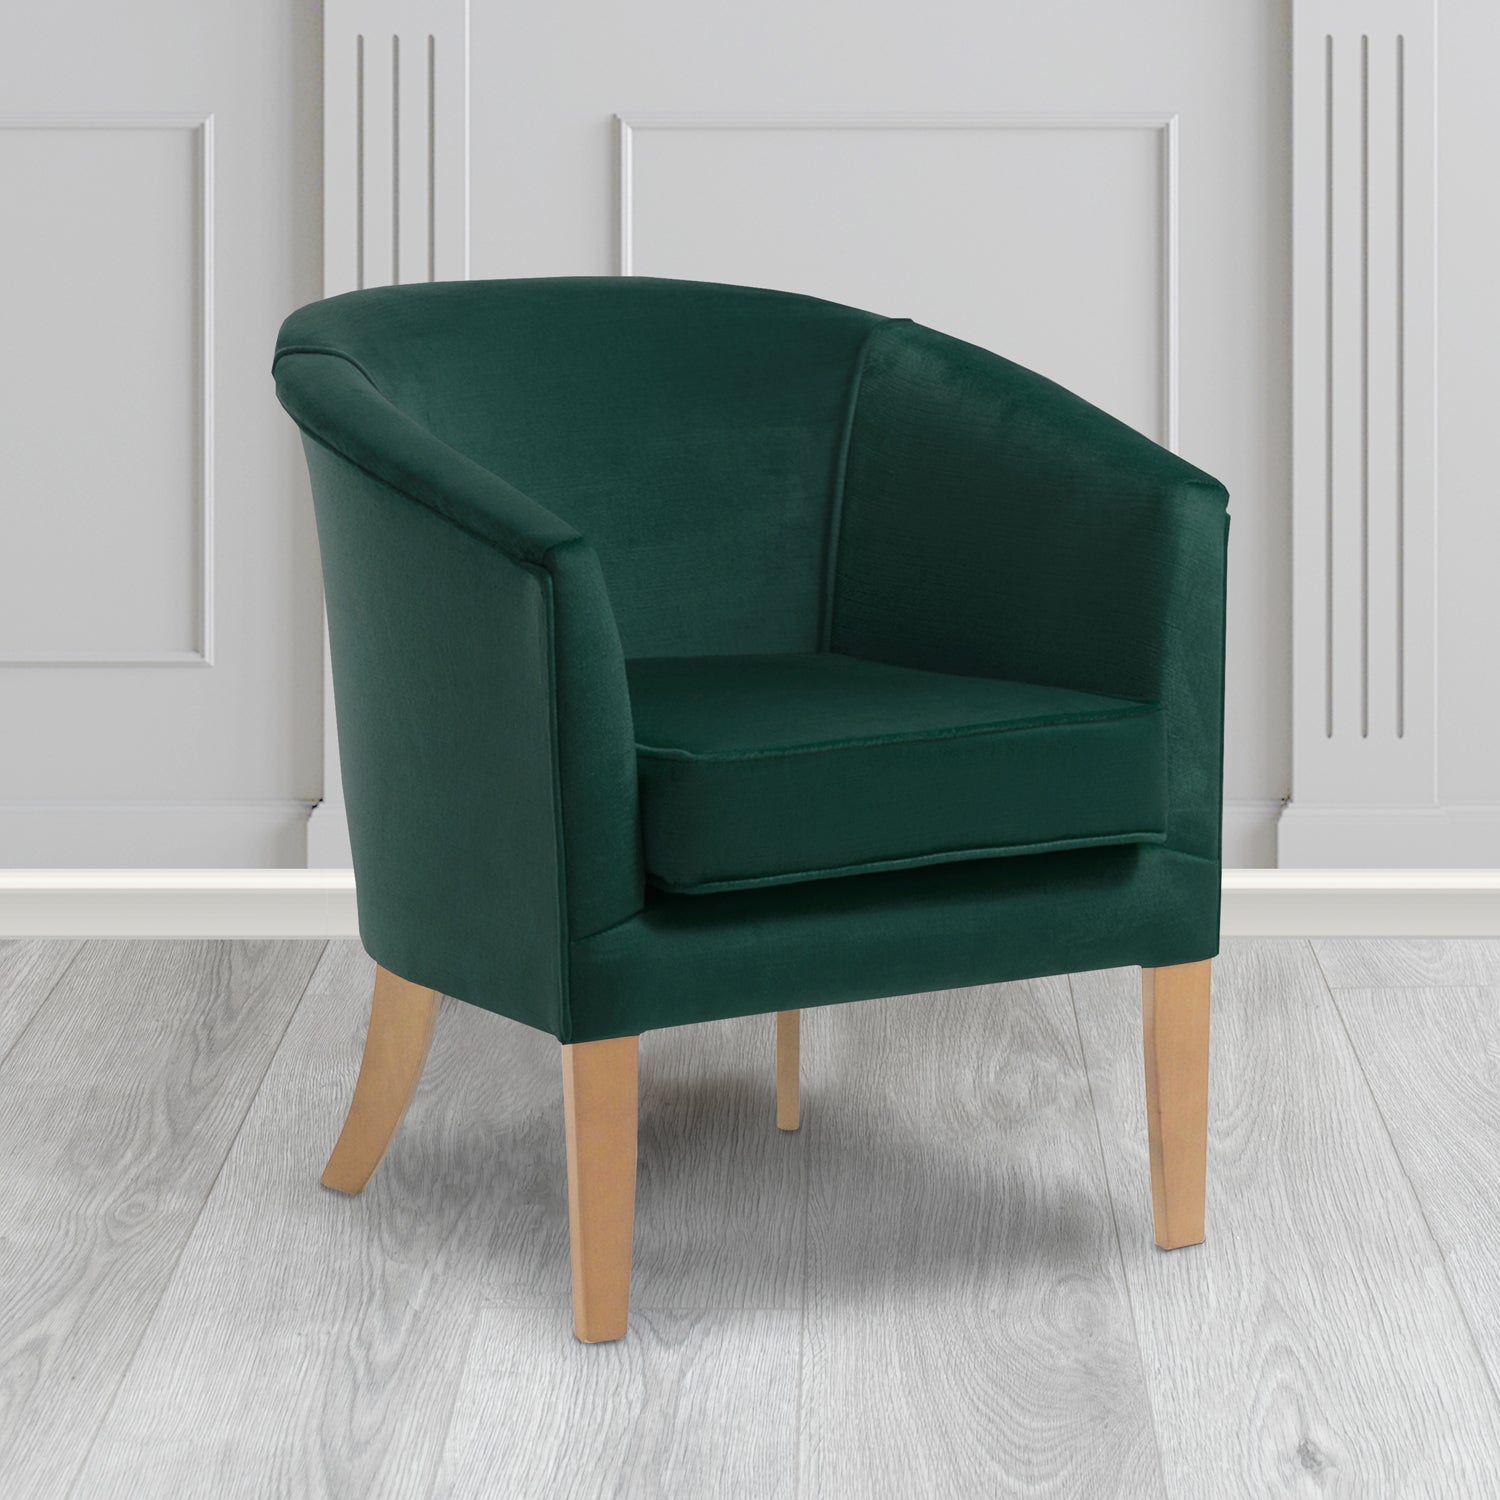 Jazz Tub Chair in Noble 203 Emerald Crib 5 Velvet Fabric - Water Resistant - The Tub Chair Shop